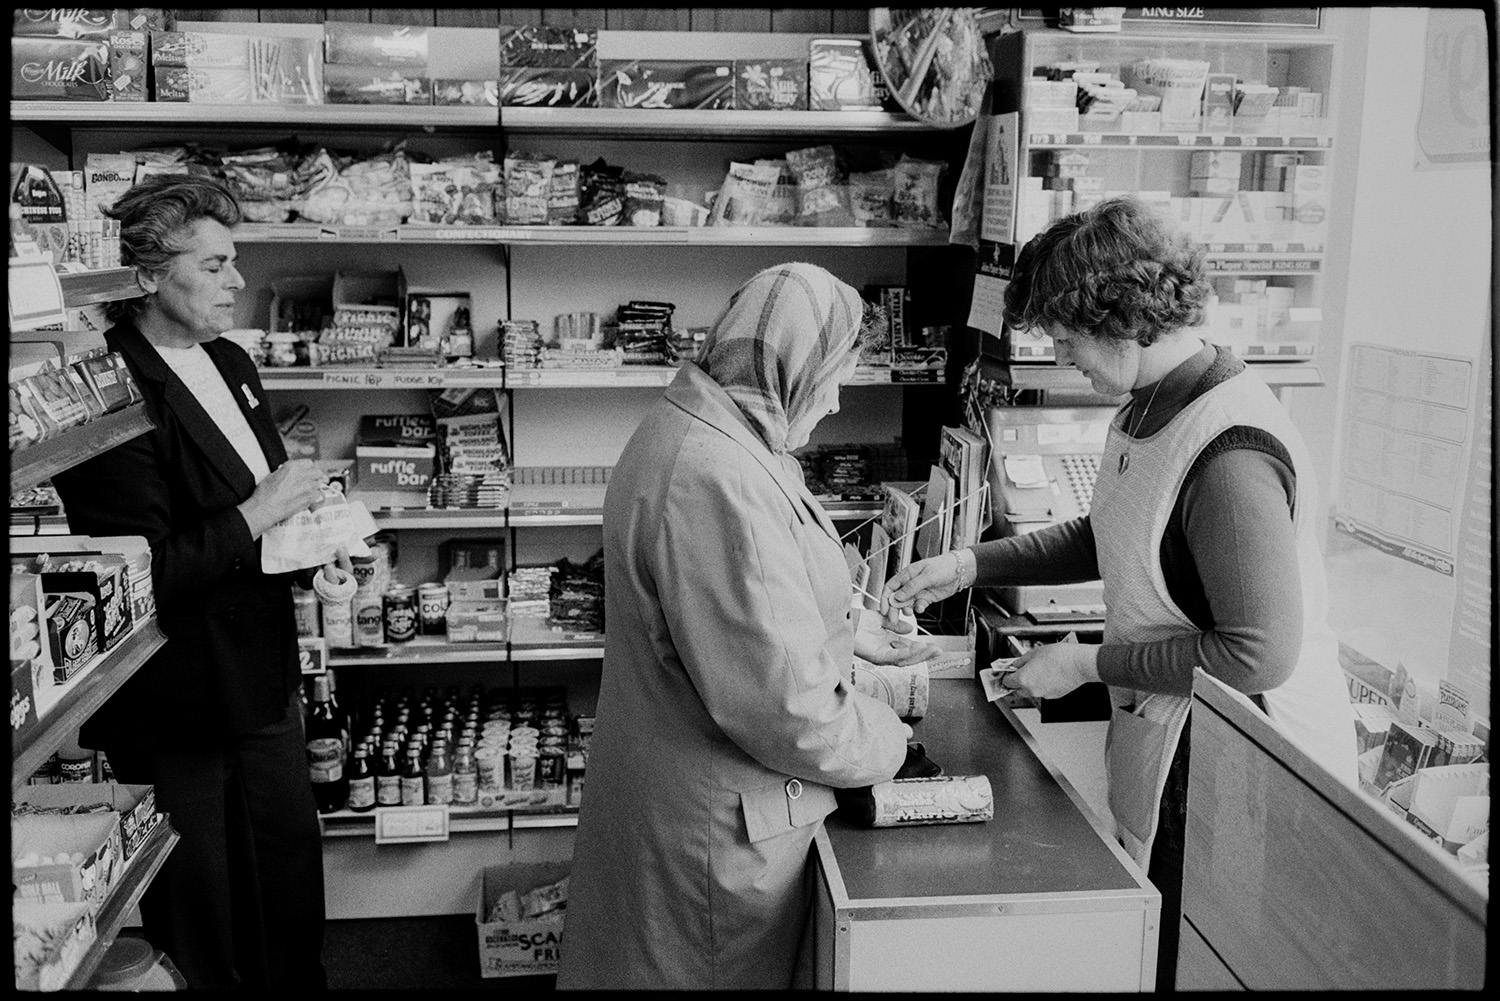 Shopkeepers in village store, customers, women buying at till.
[Women queuing up and paying for goods at the till in the village shop at Winkleigh. Sweets, soft drinks and cigarettes are on display on the shelves.]